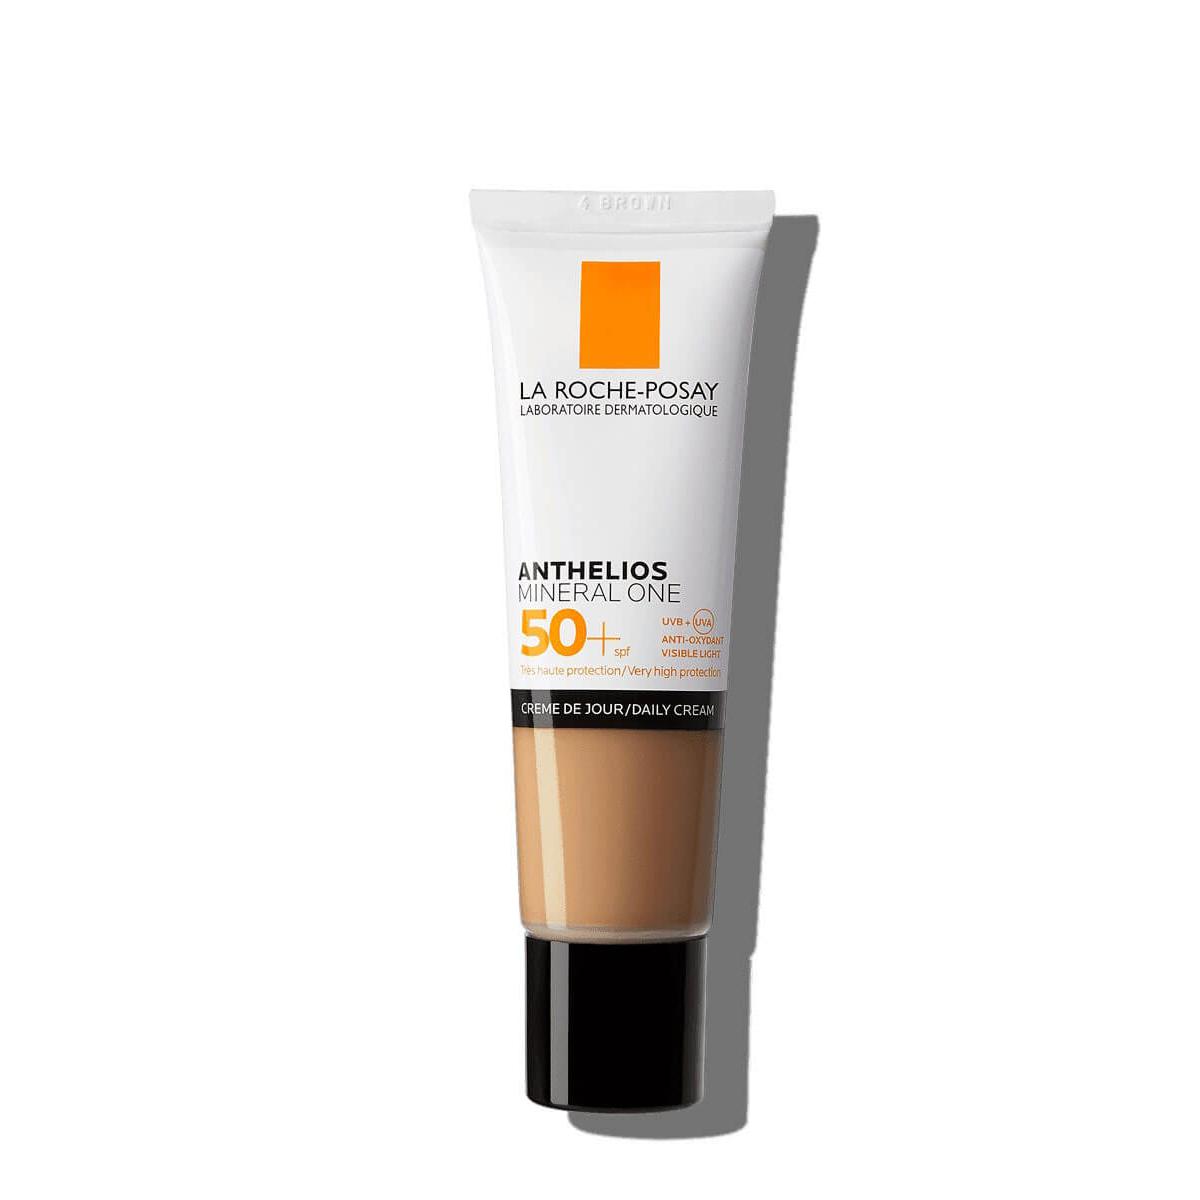 Anthelios - La roche posay anthelios mineral one color 04 brown spf50+ 30 ml